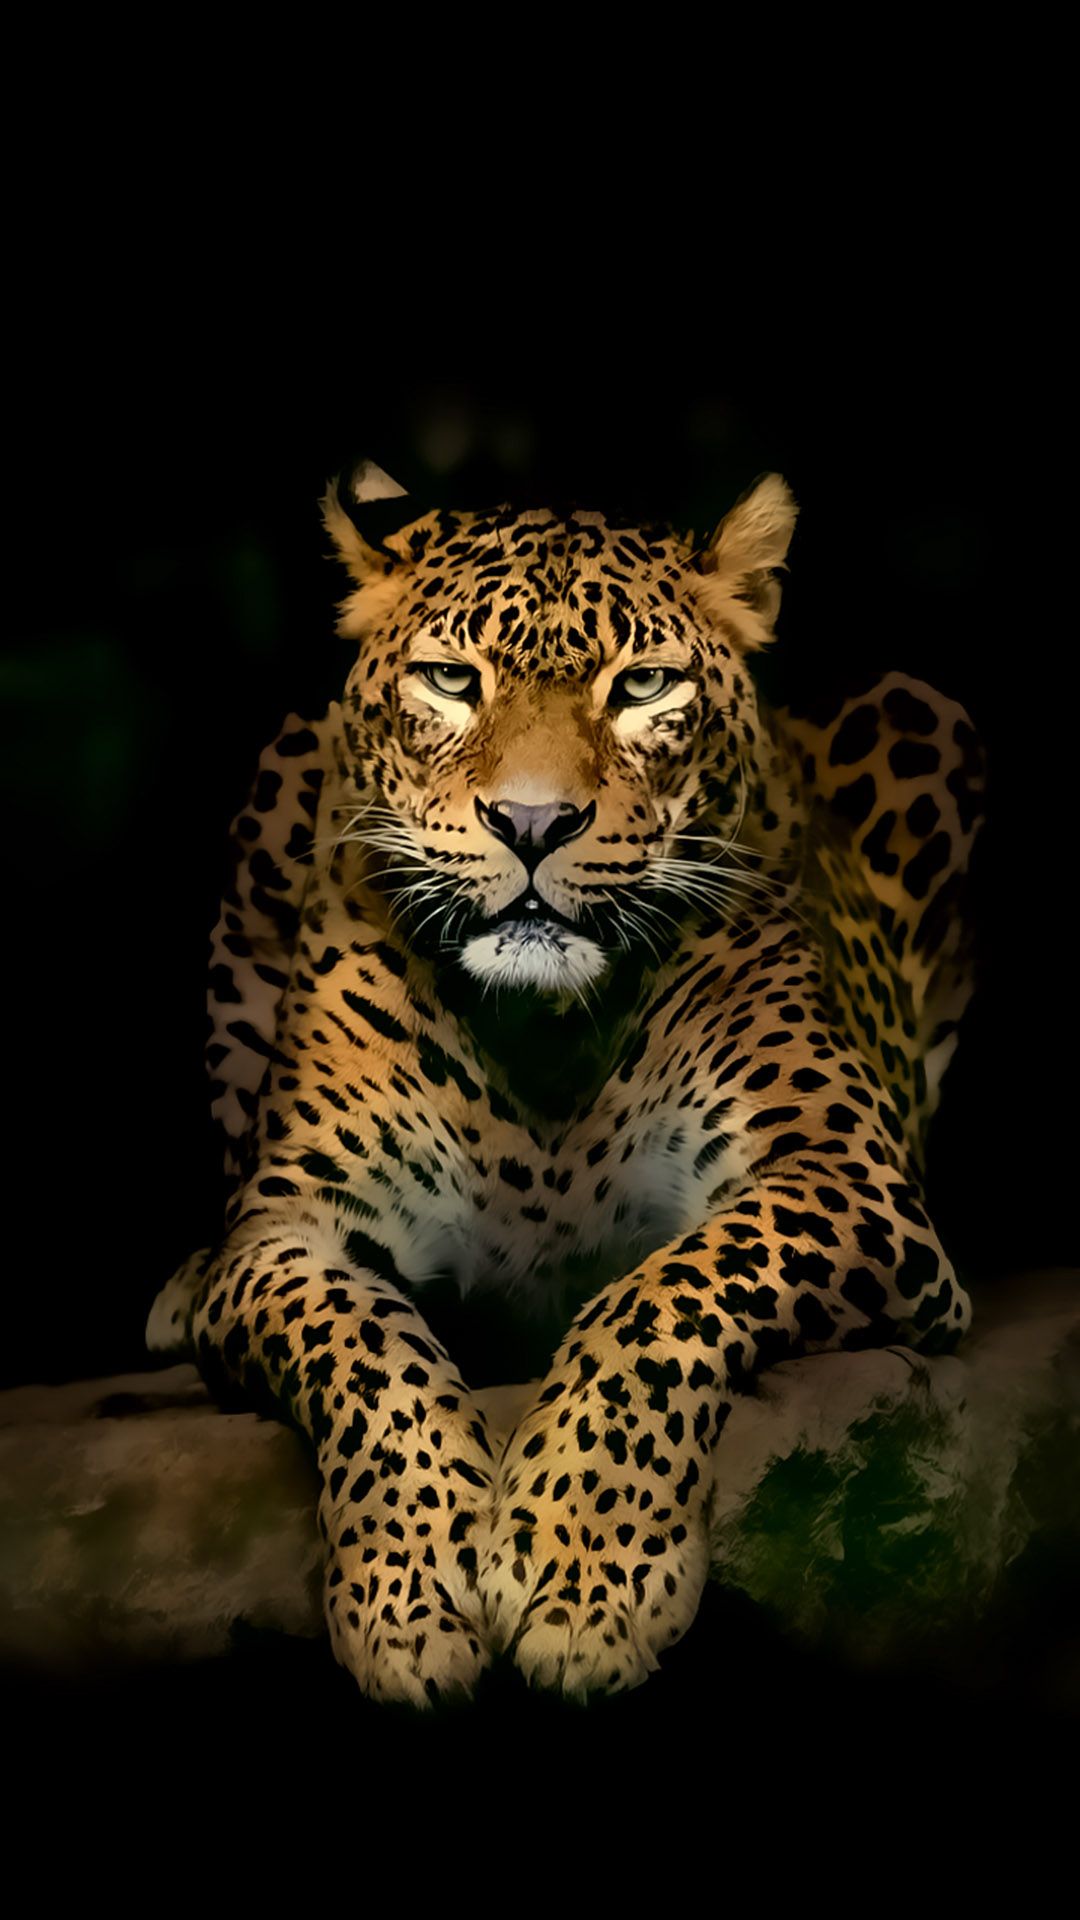 Serious Leopard 3d Spots Illustration Wild Animal Android - Ultra Hd 4k Wallpaper For Mobile - HD Wallpaper 